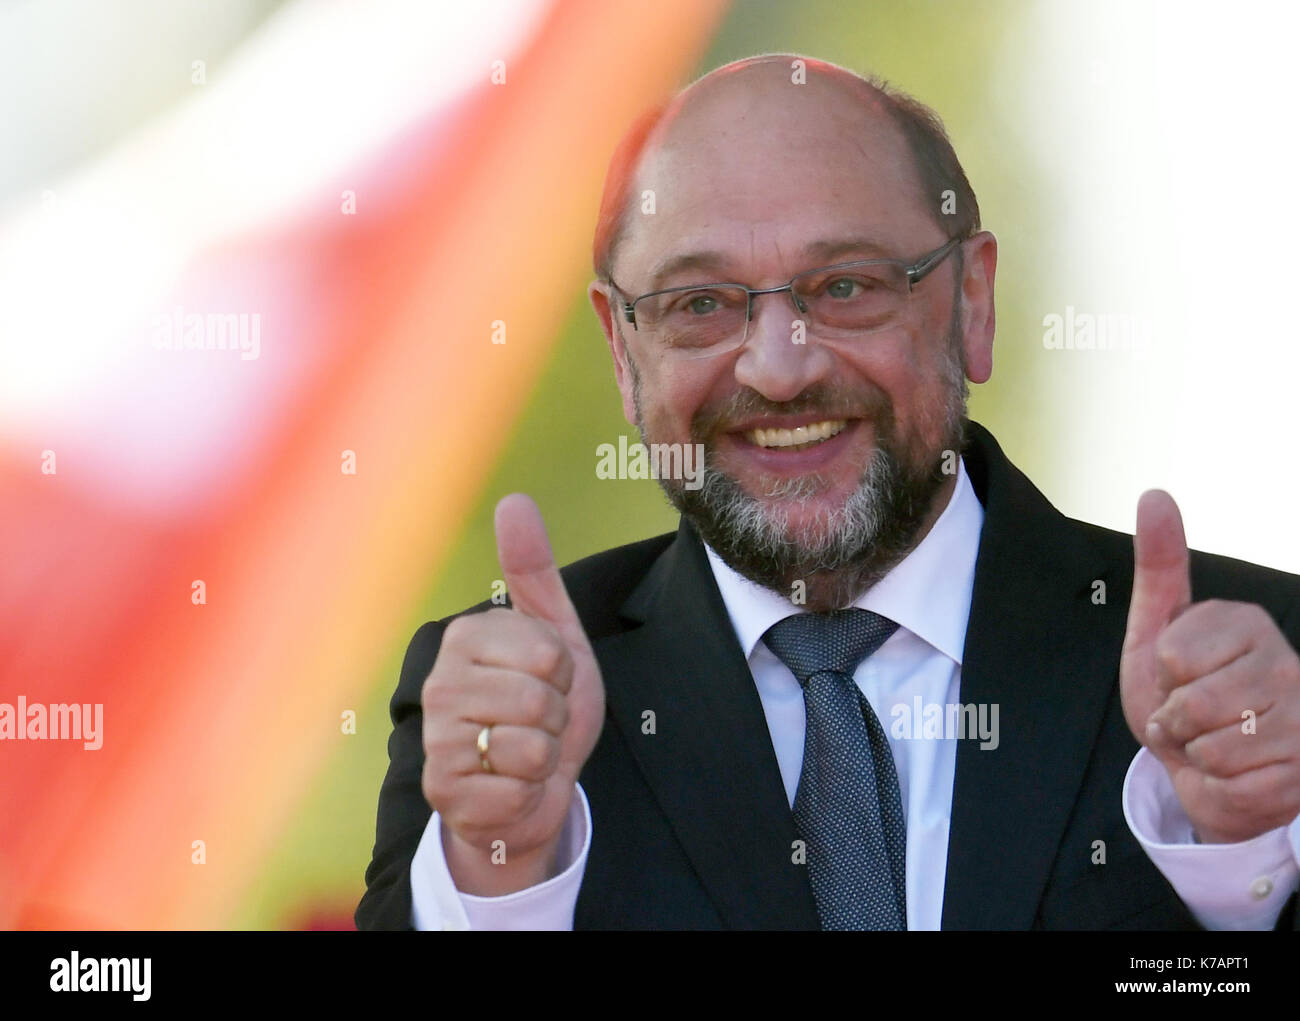 Potsdam, Germany. 15th Sep, 2017. Martin Schulz, candidate for chancellorship from the Social Democratic Party of Germany (SPD) holding two thumbs up after the election rally of his party in Potsdam, Germany, 15 September 2017. Photo: Ralf Hirschberger/dpa-Zentralbild/dpa/Alamy Live News Stock Photo